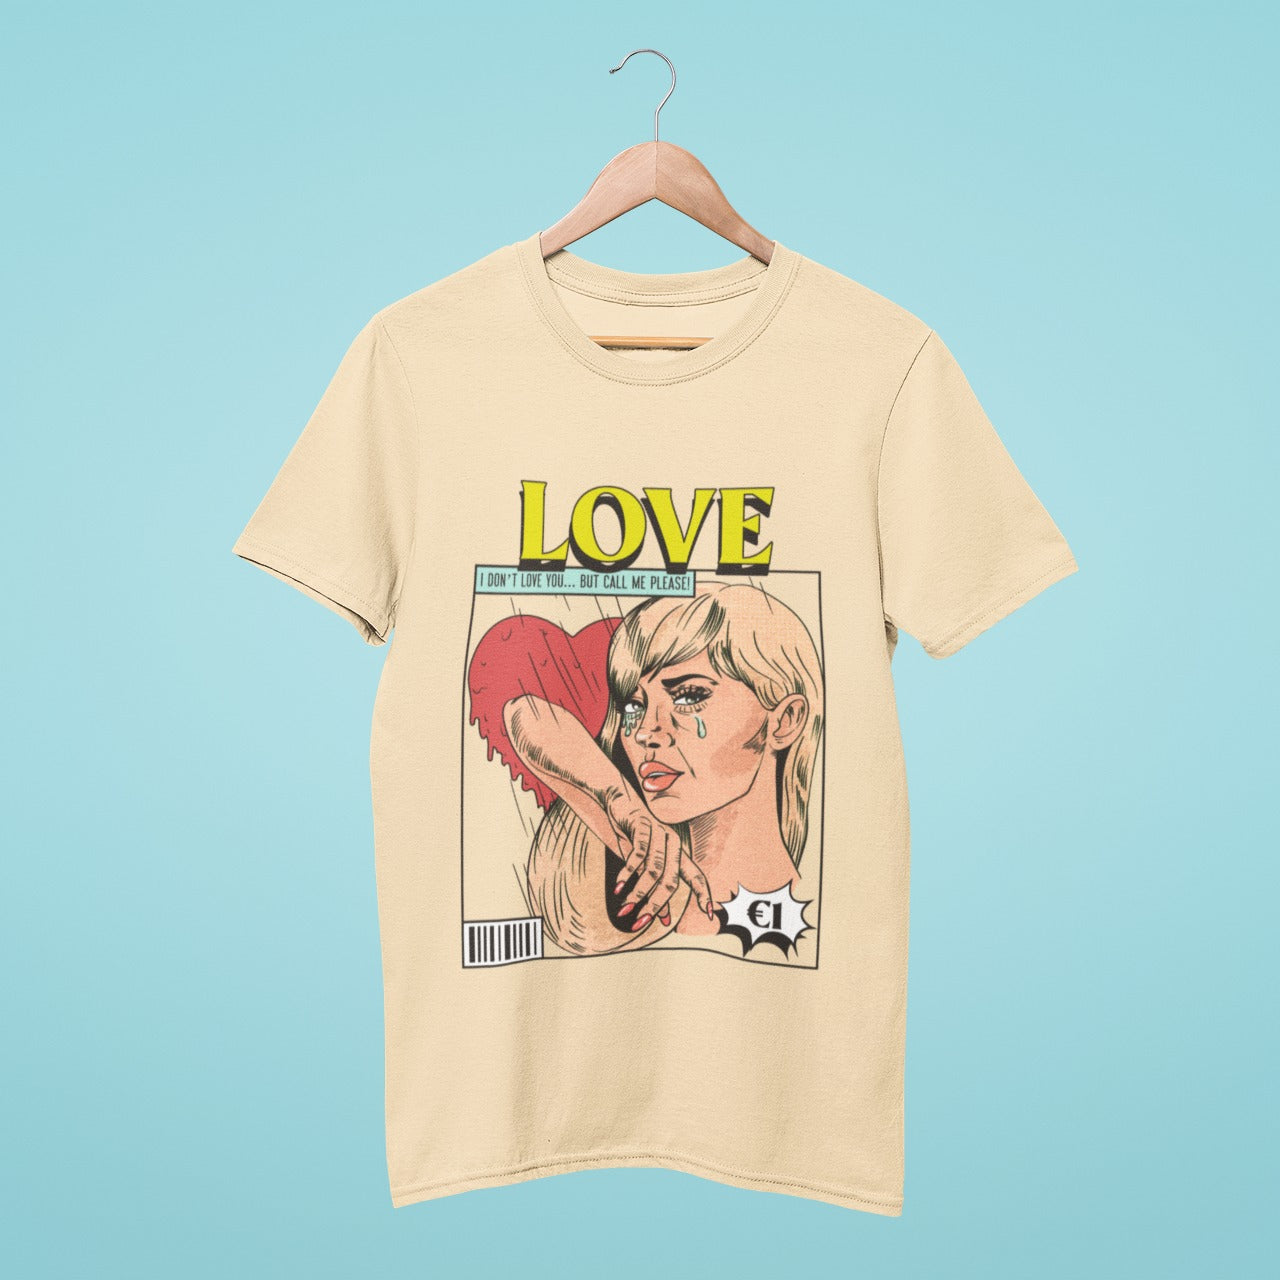 Looking for a vintage touch? This beige t-shirt features a striking image of a crying woman holding a bleeding heart, all while the word "love" is boldly written. The design perfectly captures the bittersweet nature of love and heartbreak, making it a must-have for anyone who appreciates vintage art.